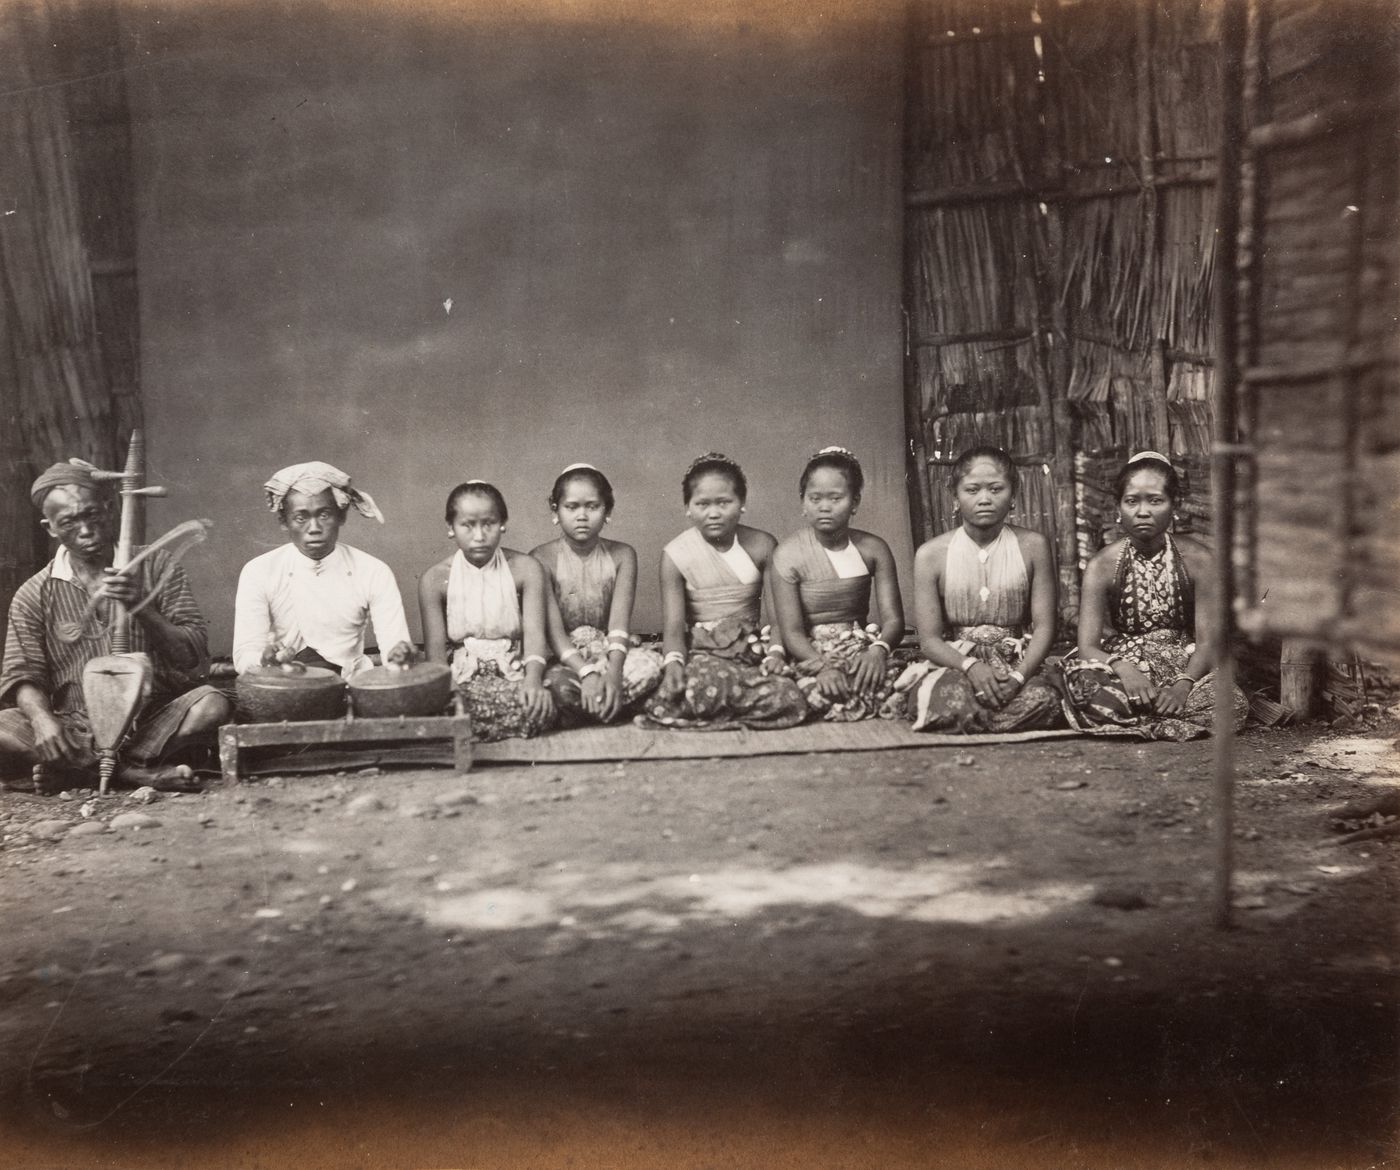 Group portrait of men and women, probably musicians, Java, Indonesia